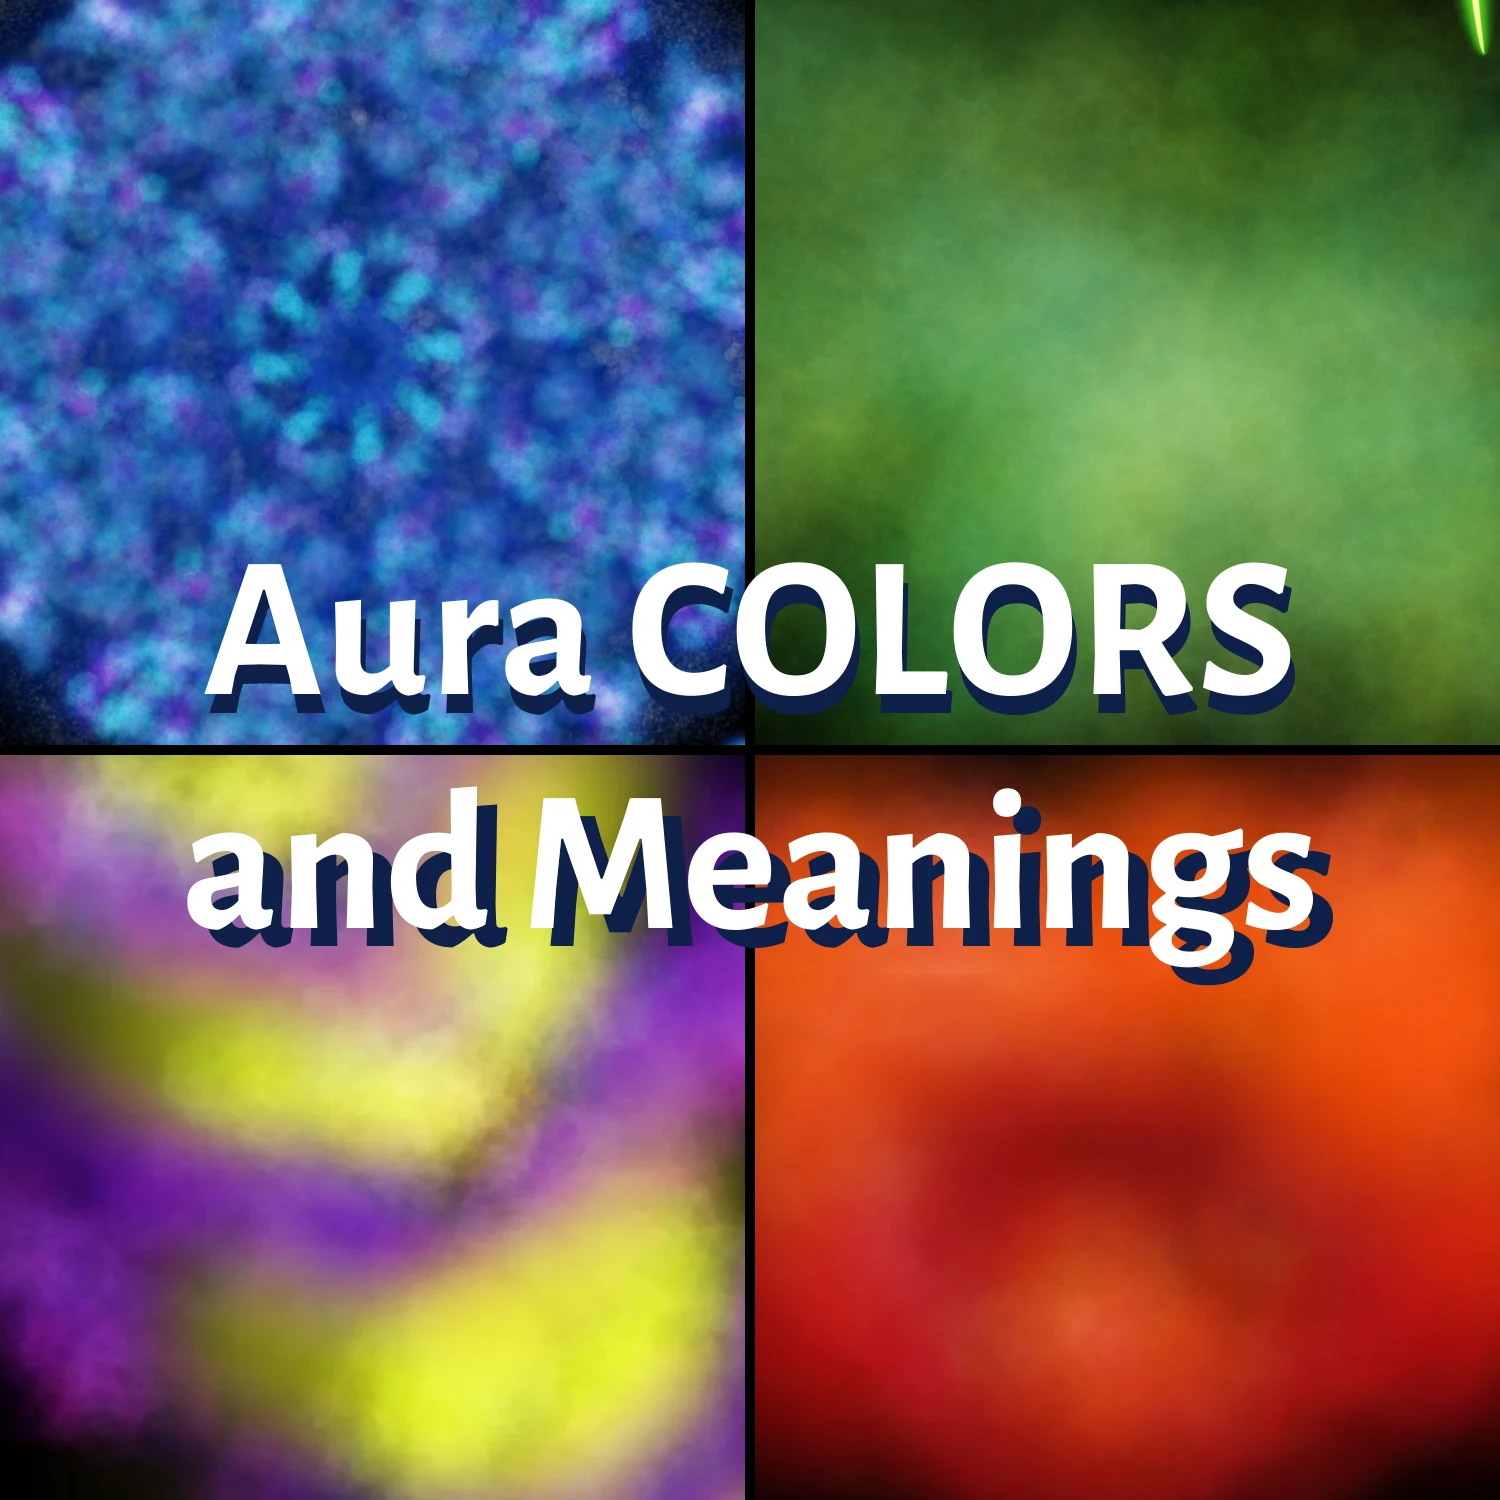 aura colors what do they mean